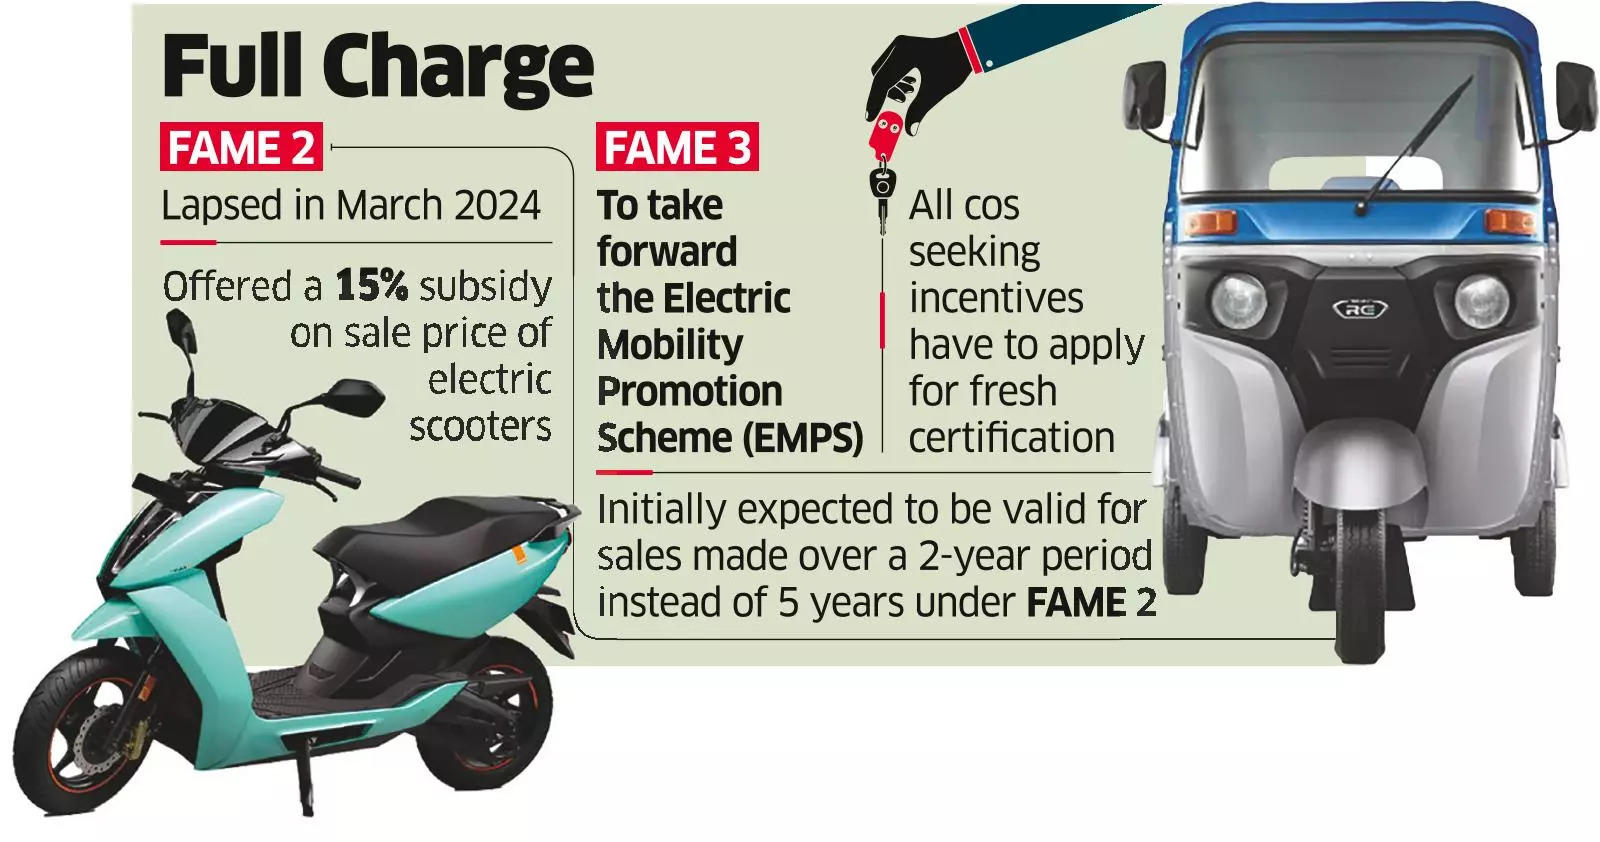 FAME 3 to be Launched Soon after New Govt Takes Charge